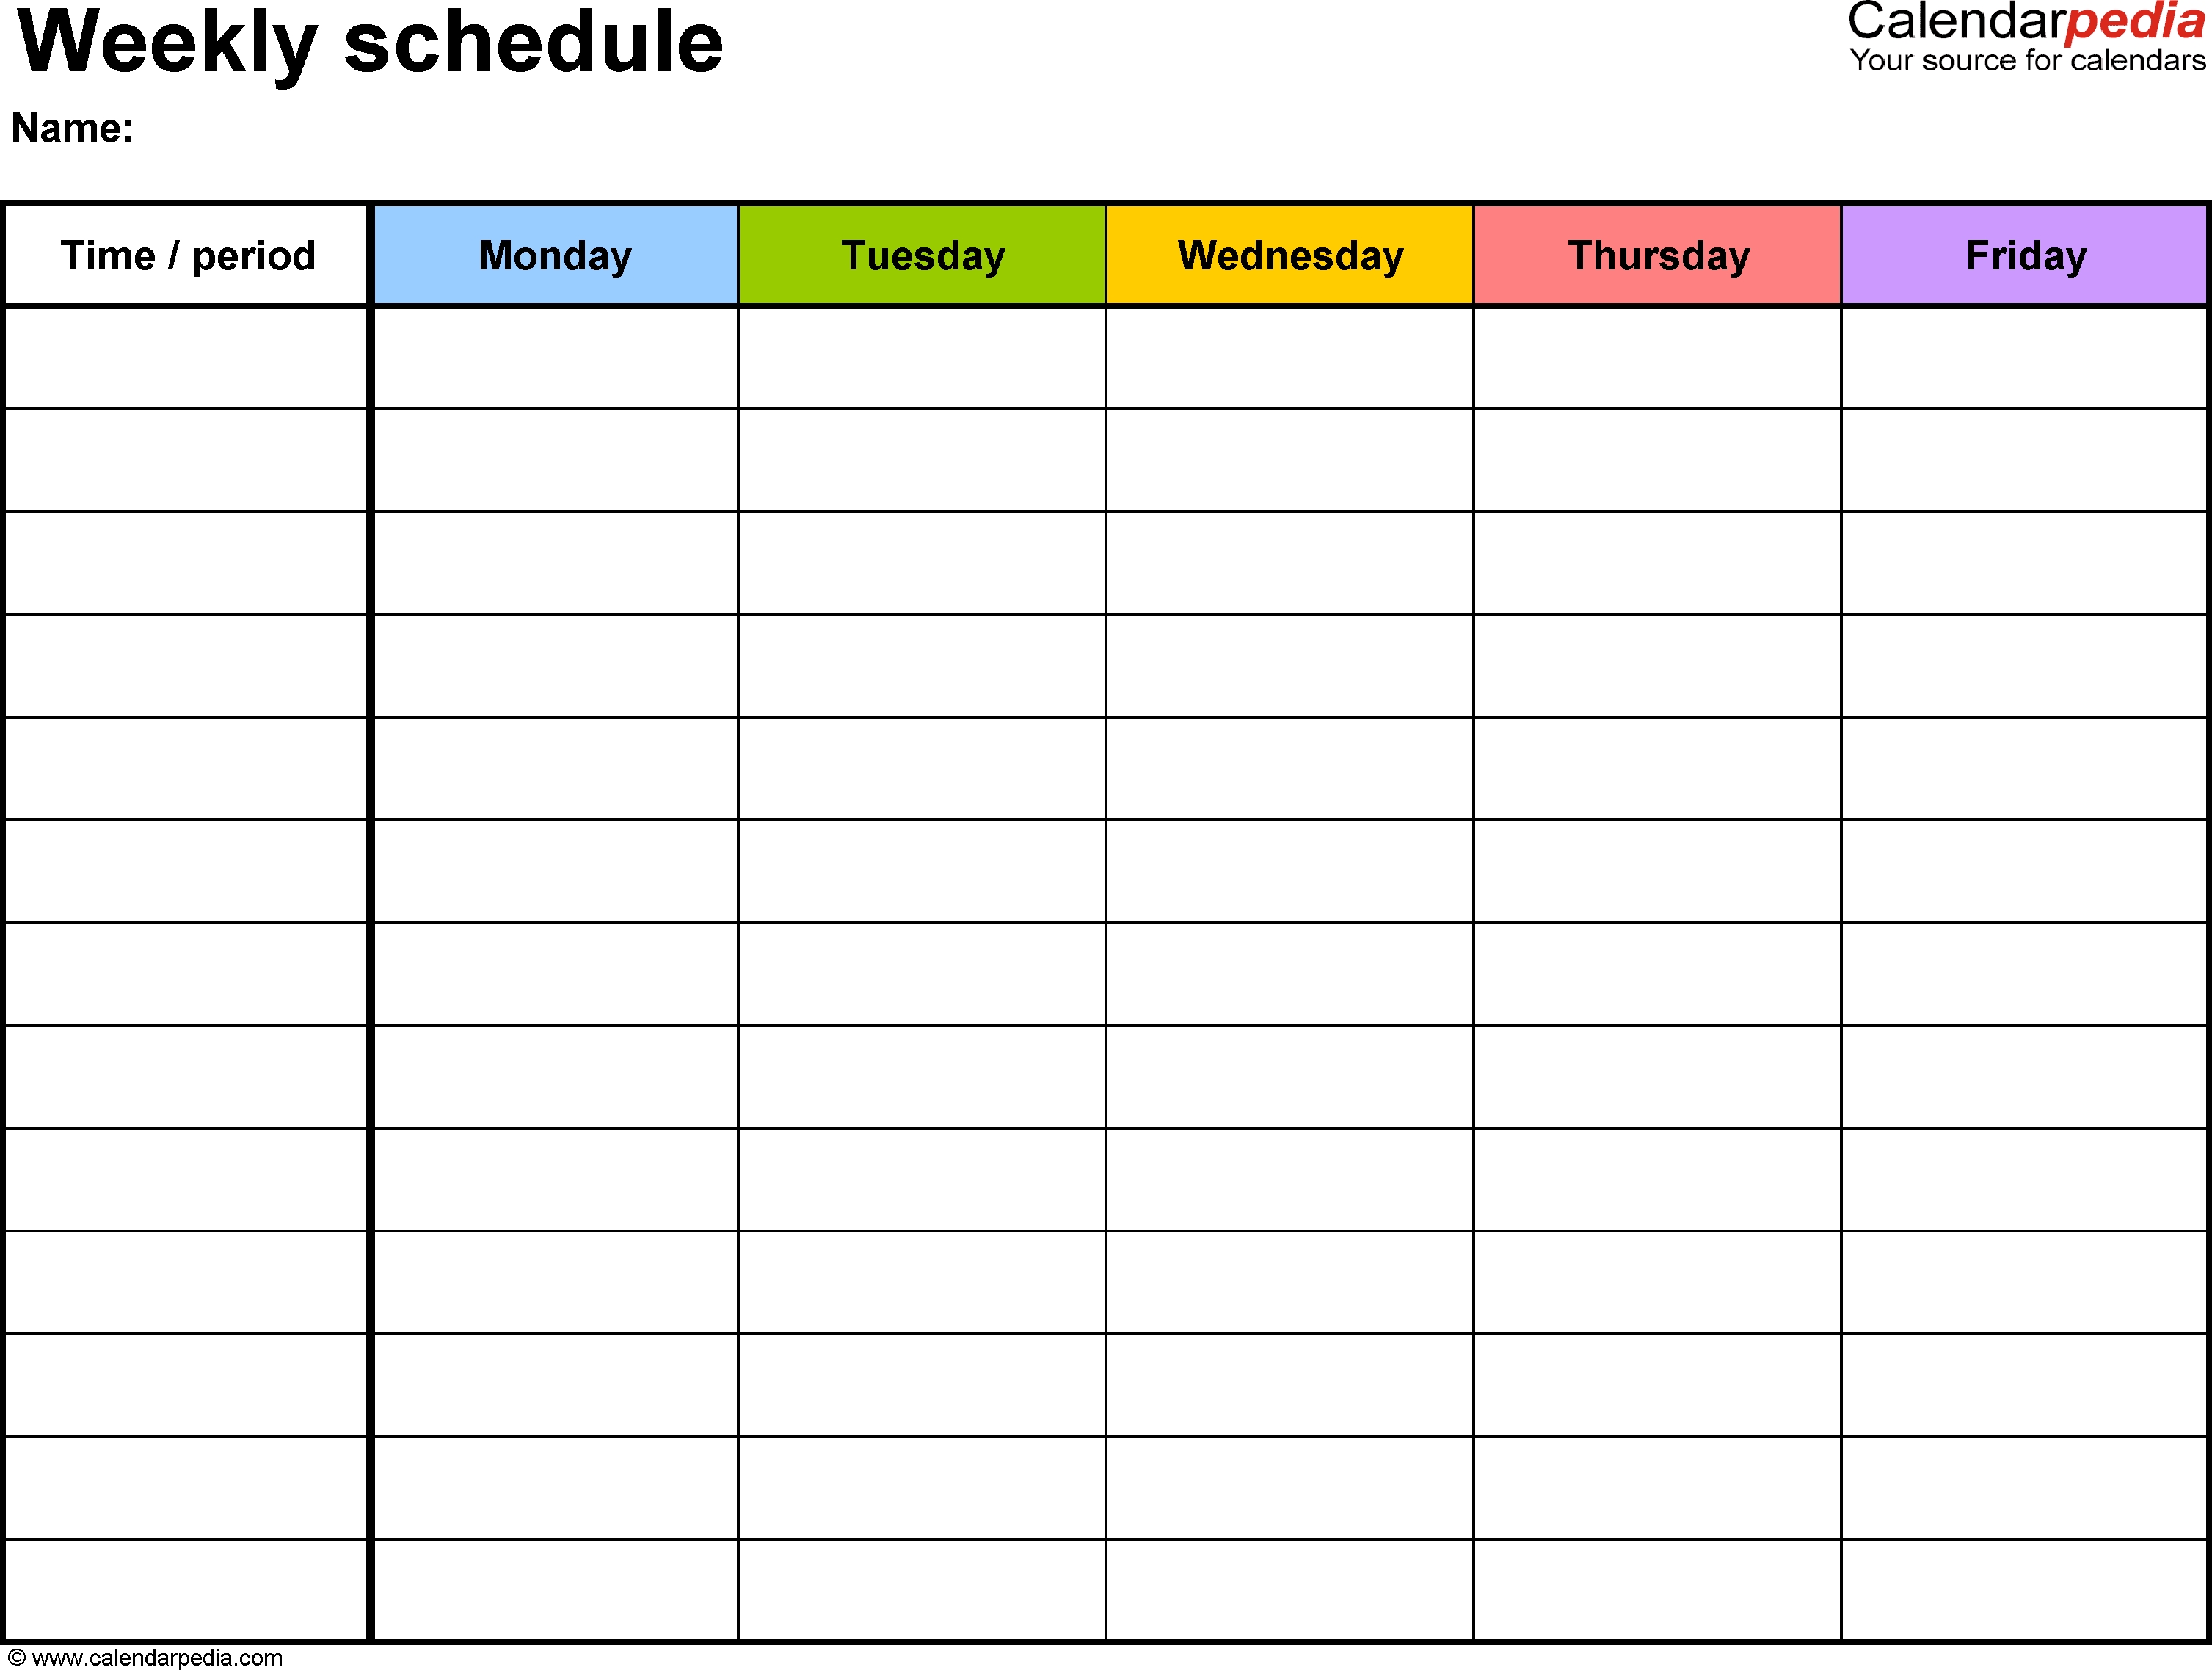 Free Weekly Schedule Templates For Word - 18 Templates-Mon Thru Friday Weekly Blank Calendar